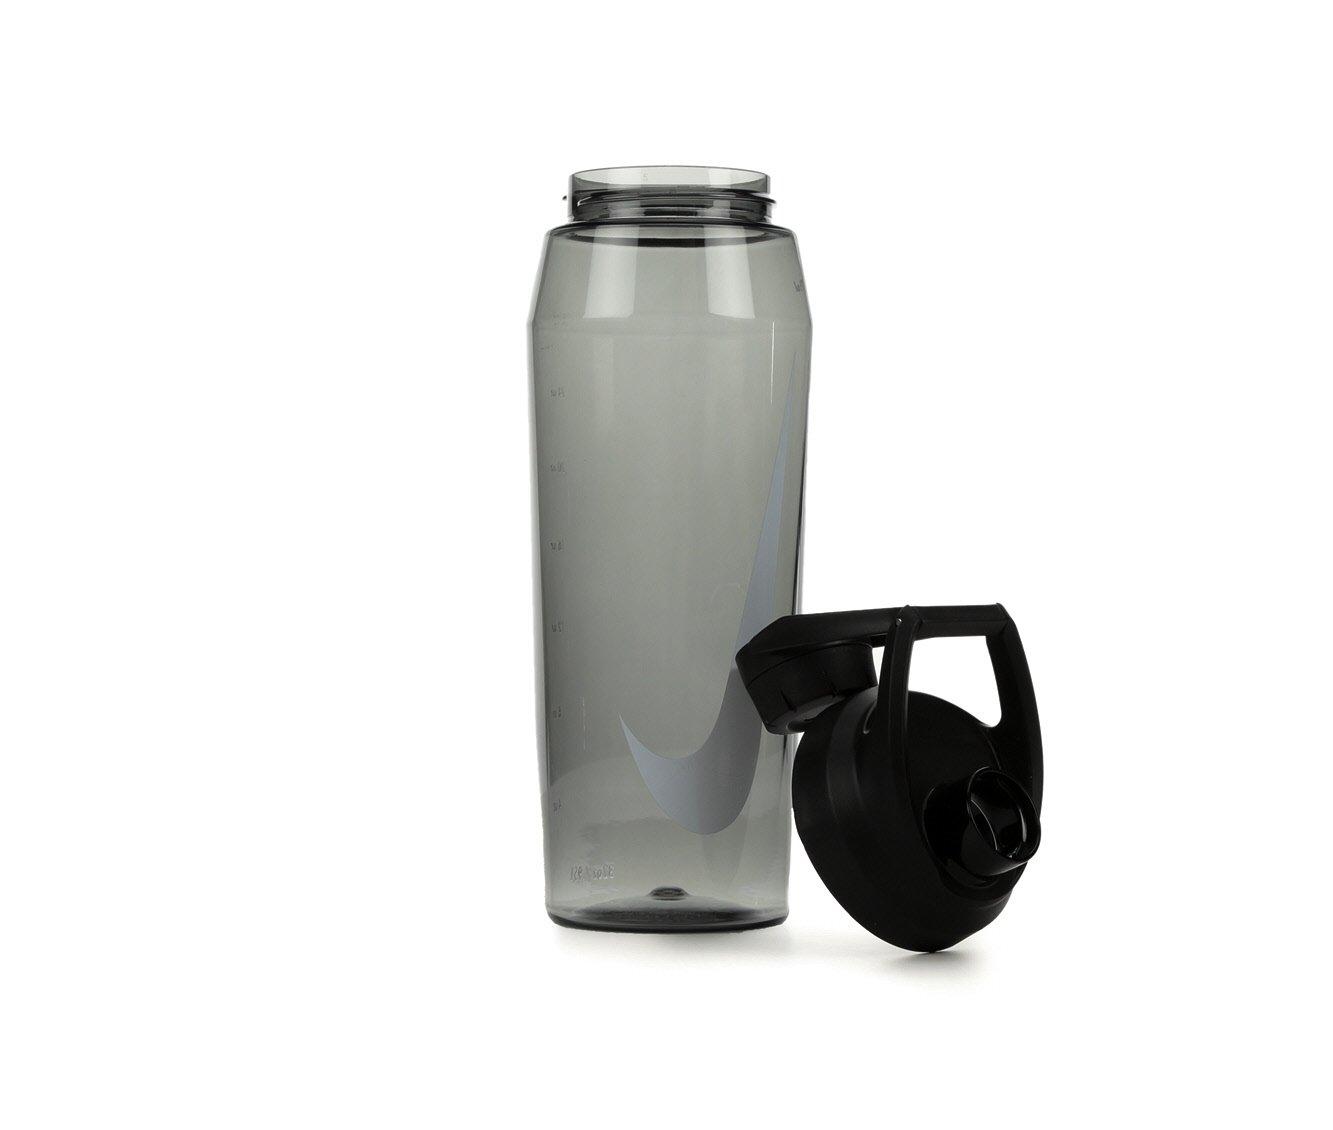 Nike Stainless Steel Recharge Straw Bottle 32oz.